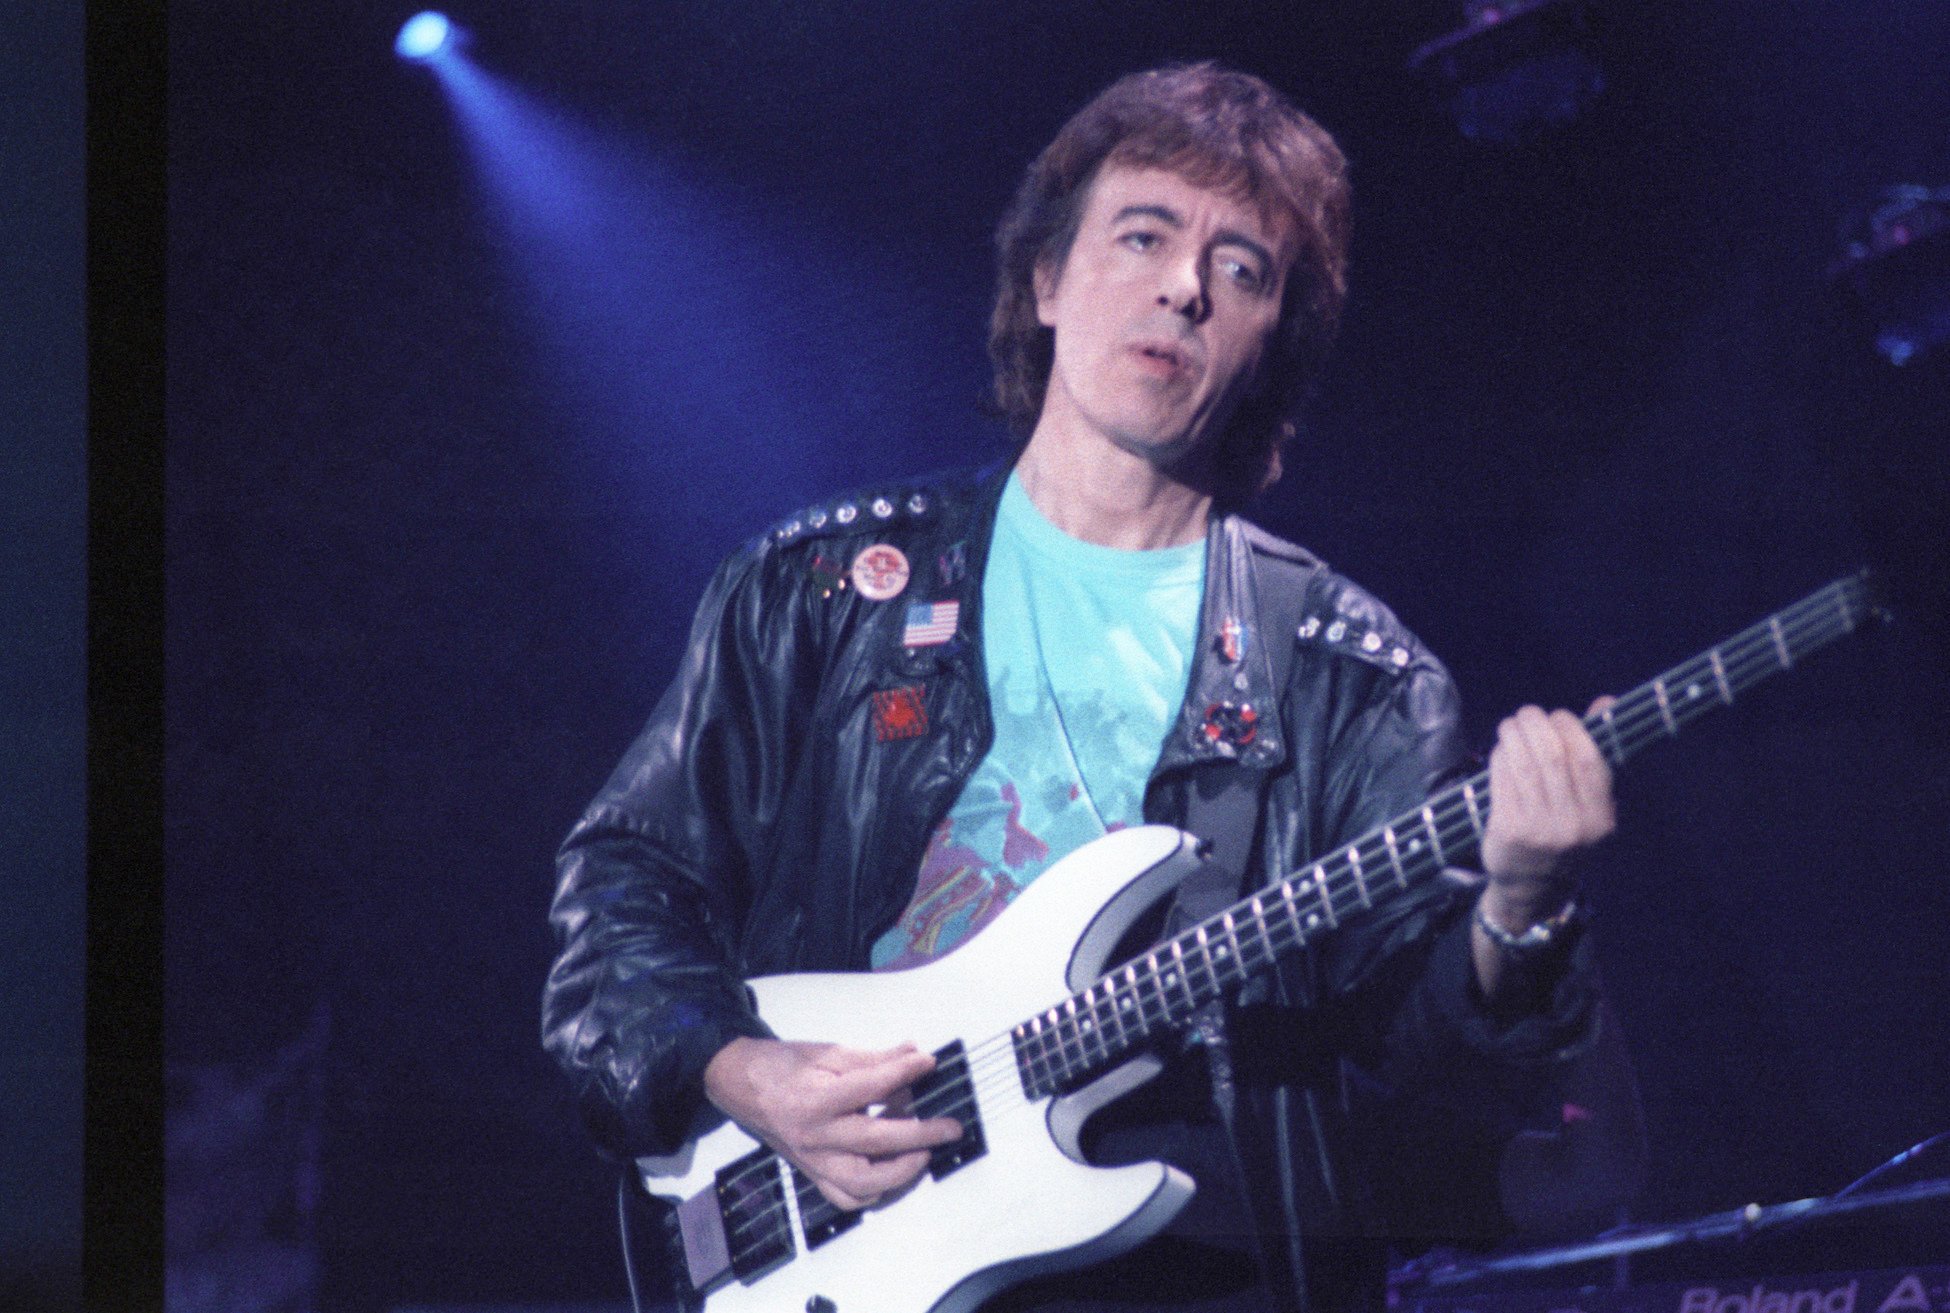 Bill Wyman performs with The Rolling Stones in Minneapolis, Minnesota in 1989